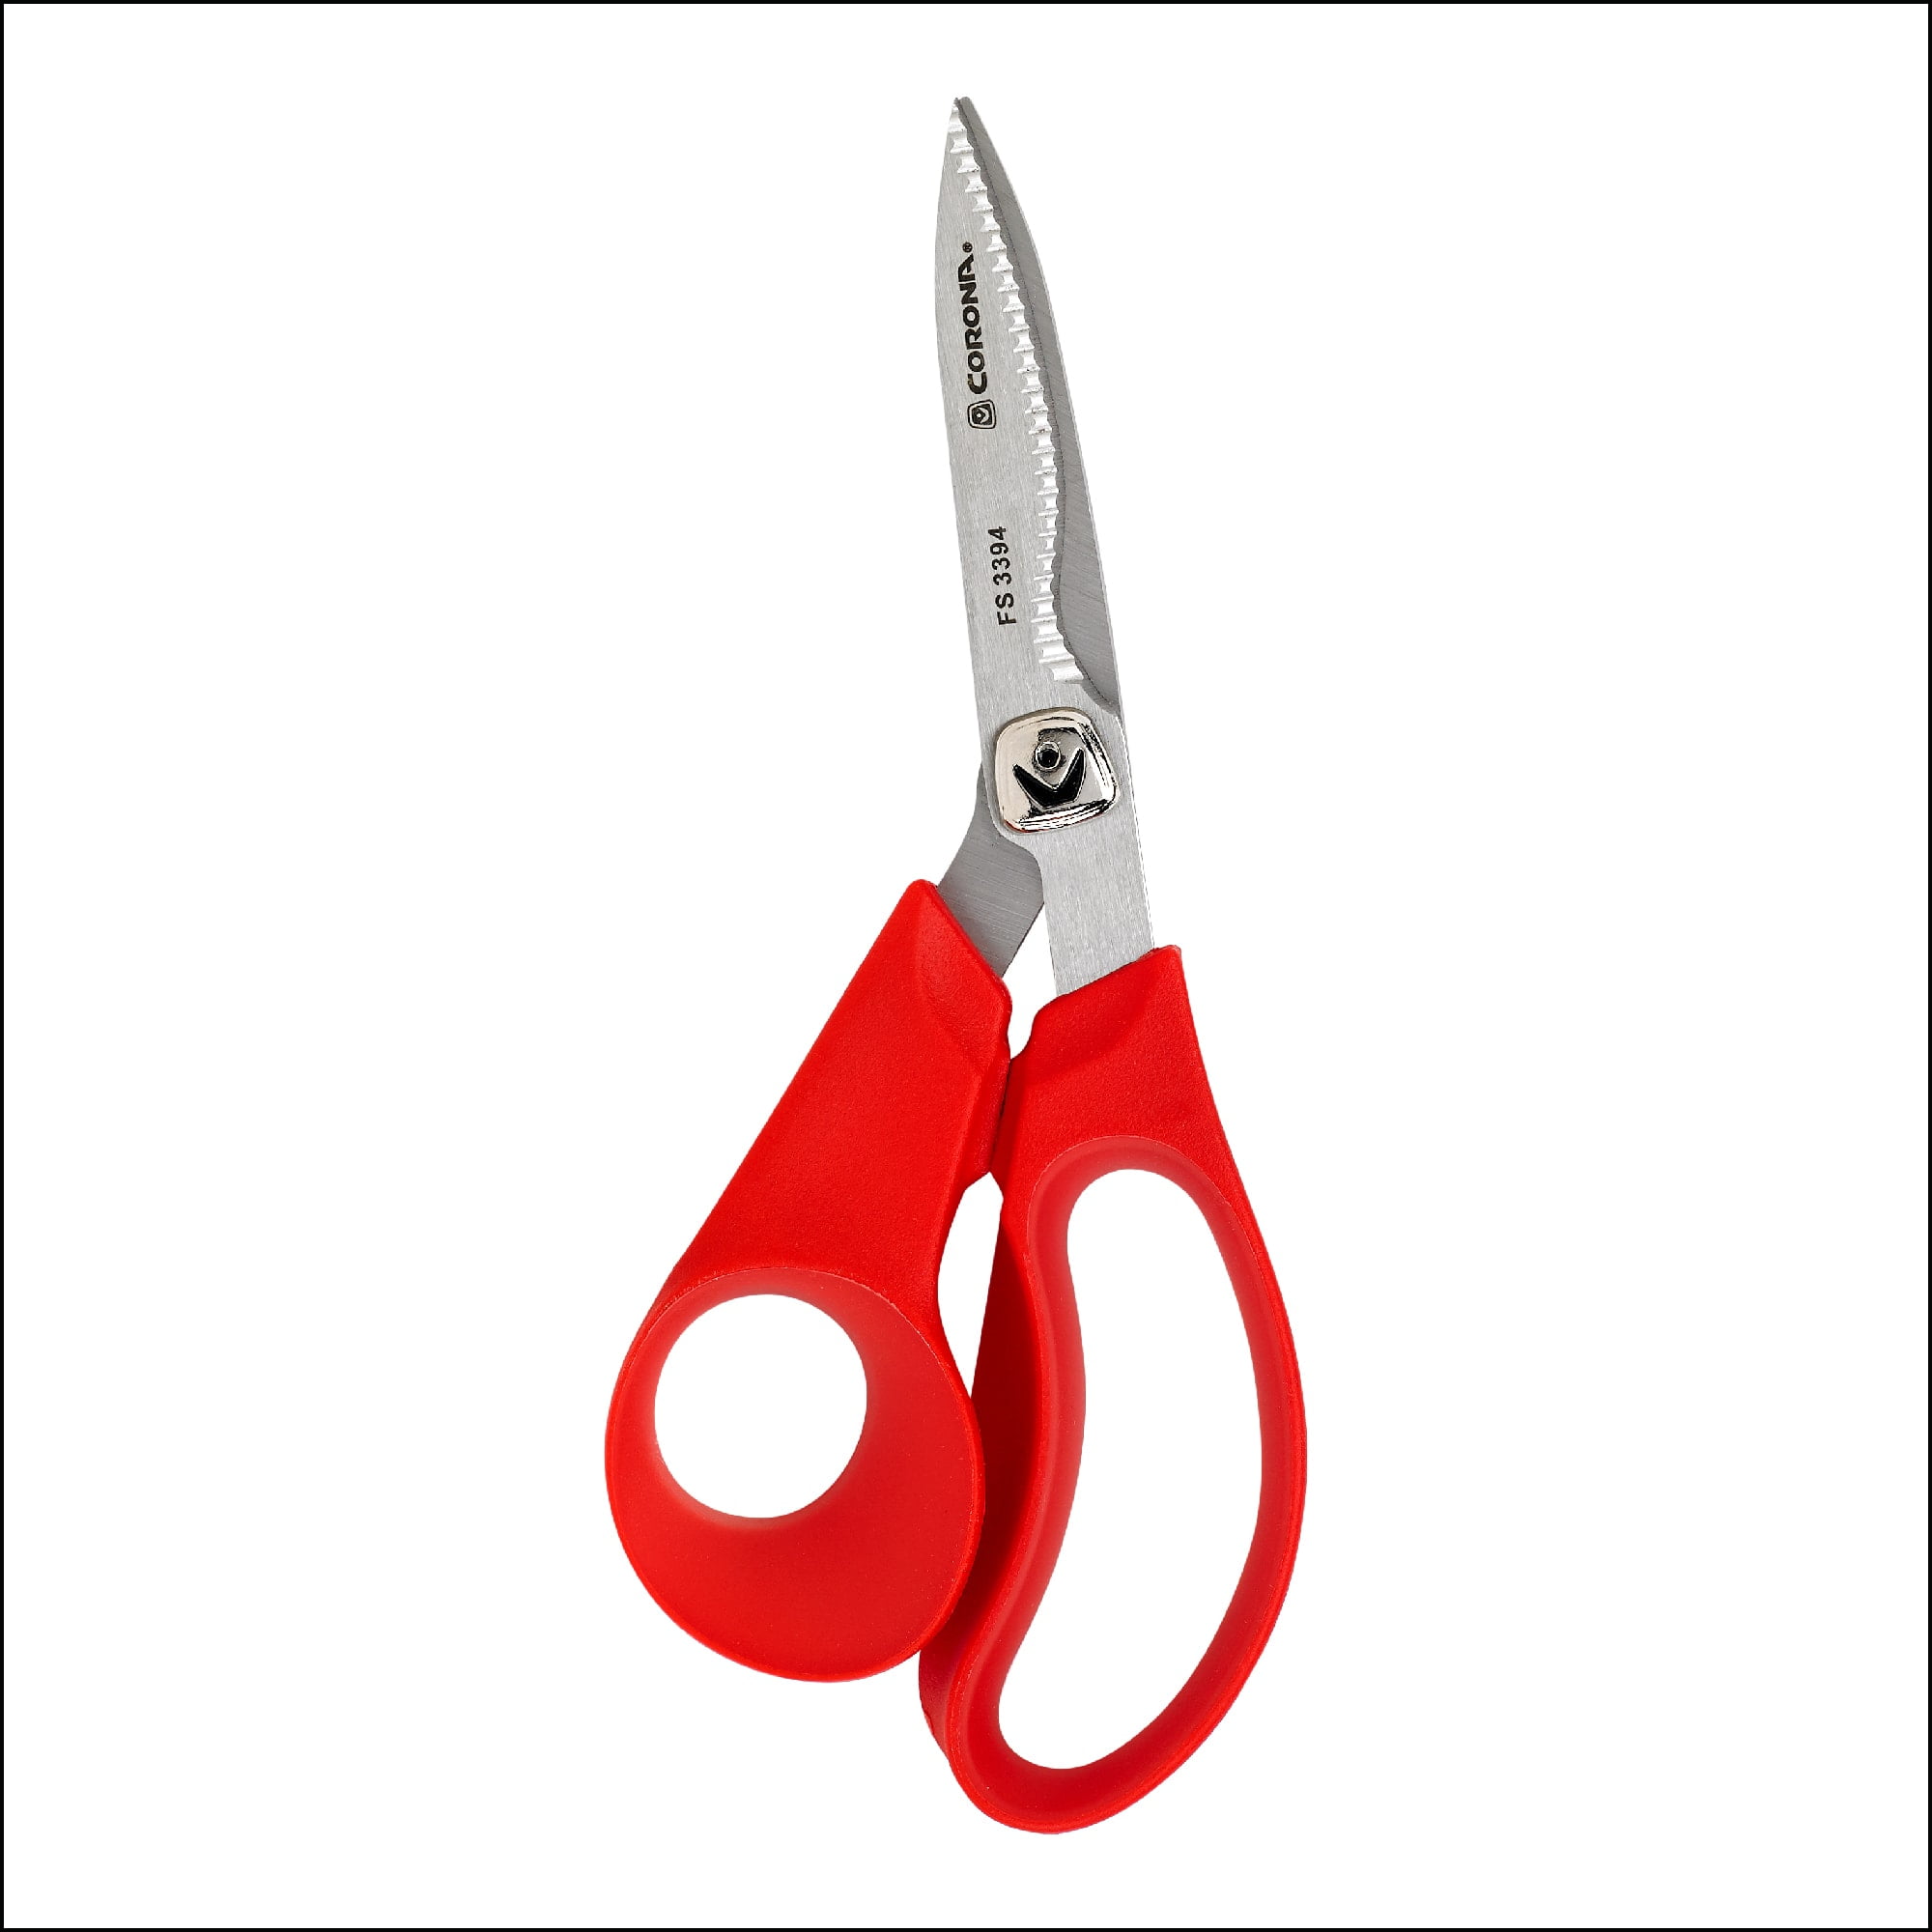 3 Inch Blade FS 4000 Corona Stainless Steel Floral Scissors 